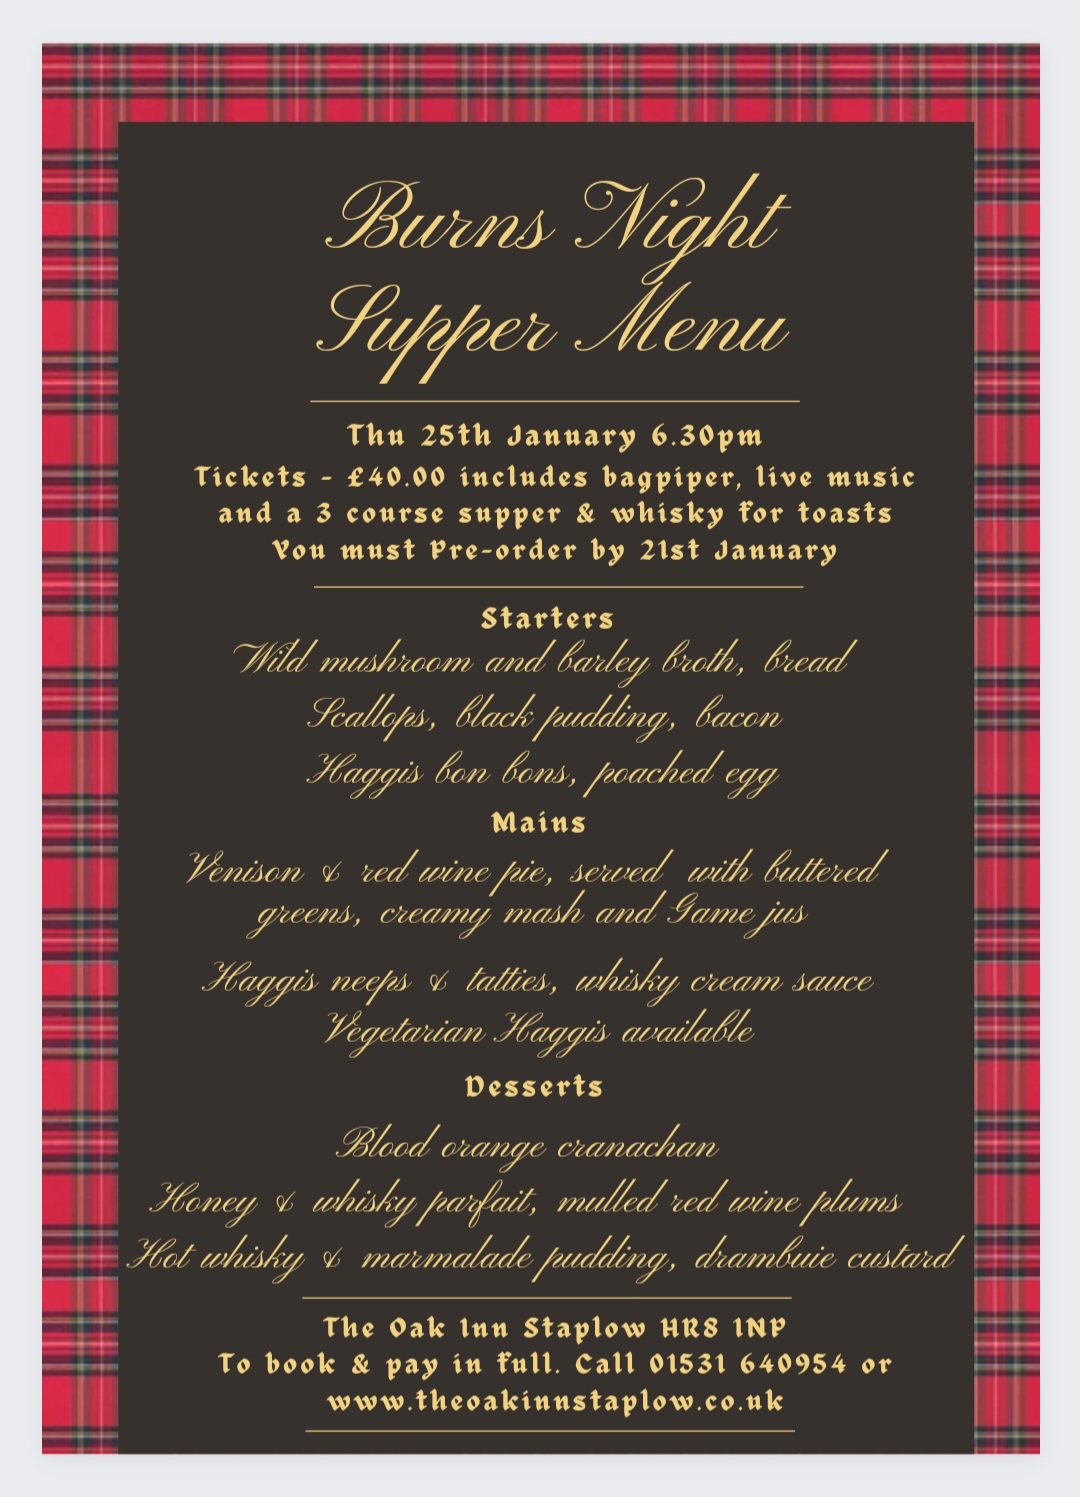 Join us for a full blown BURNS NIGHT SUPPER on Thursday 25th January at 6.30pm. We have a Haggis, Bagpipes, Music and Whiskey! Plus all the usual traditions of a typical BURNS NIGHT! 🏴󠁧󠁢󠁳󠁣󠁴󠁿🏴󠁧󠁢󠁳󠁣󠁴󠁿🏴󠁧󠁢󠁳󠁣󠁴󠁿